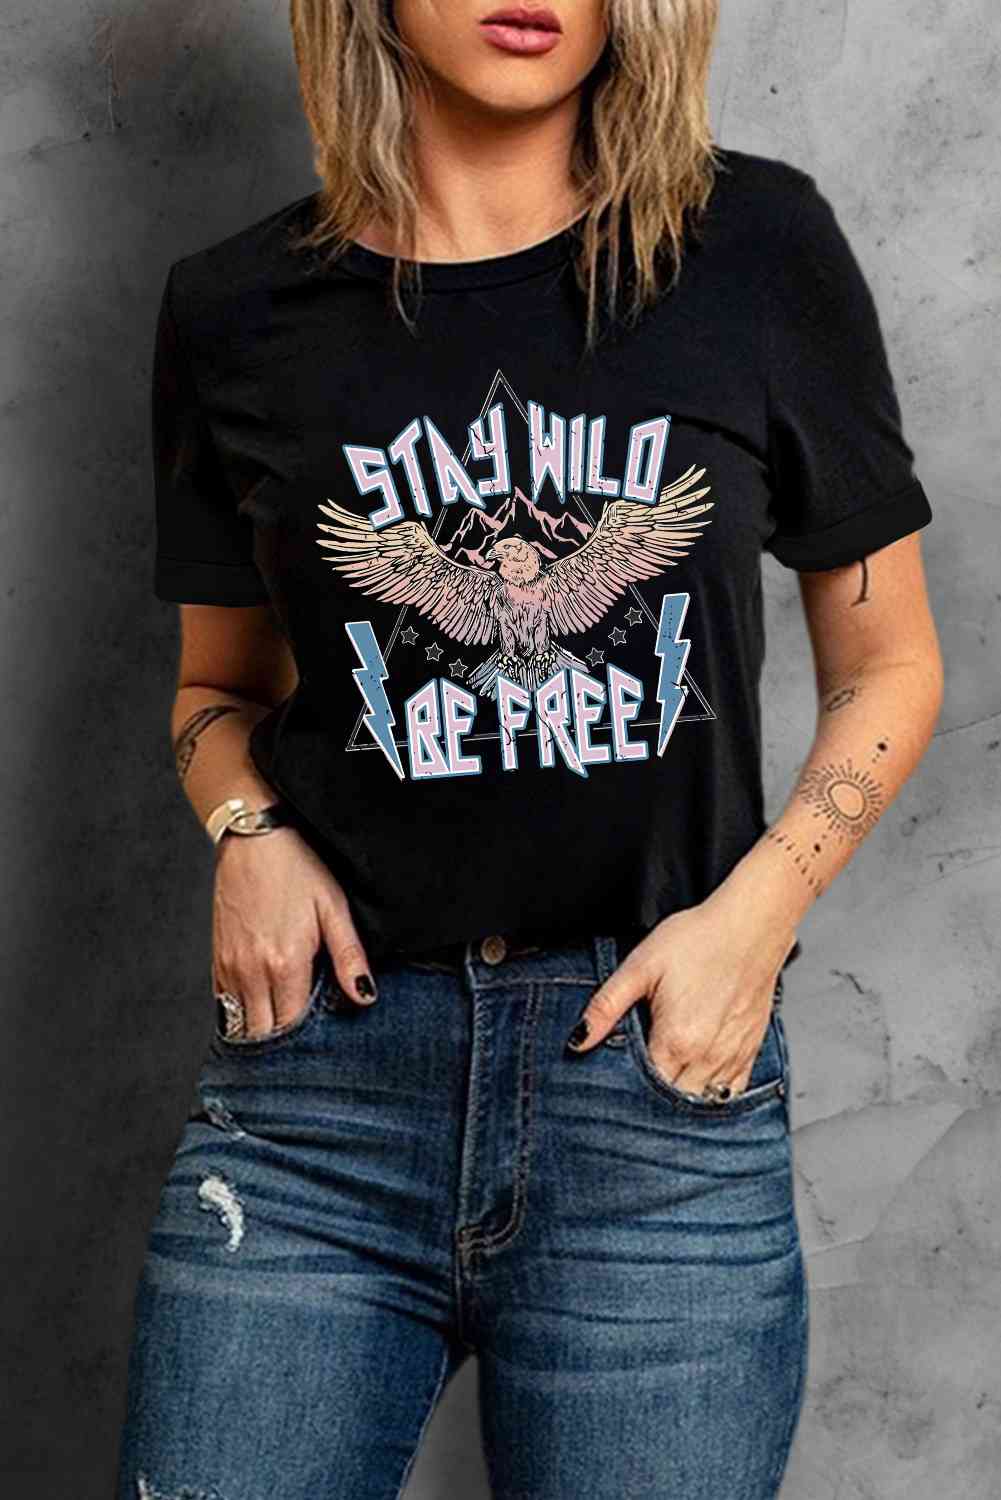 STAY WILD BE FREE Graphic Round Neck Tee - Shop Tophatter Deals, Electronics, Fashion, Jewelry, Health, Beauty, Home Decor, Free Shipping